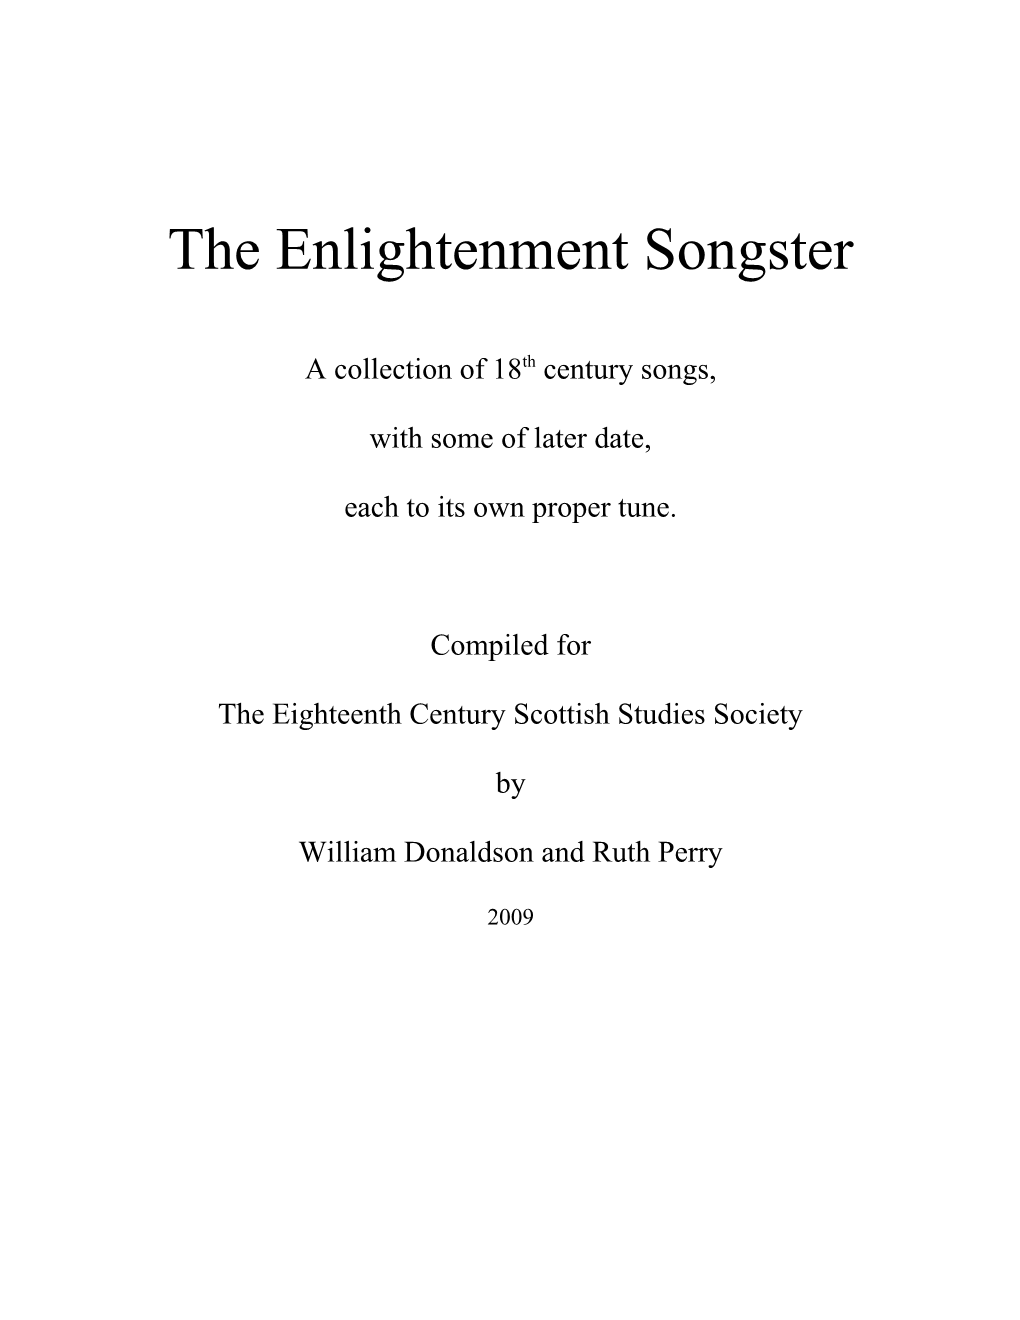 The Enlightenment Songster